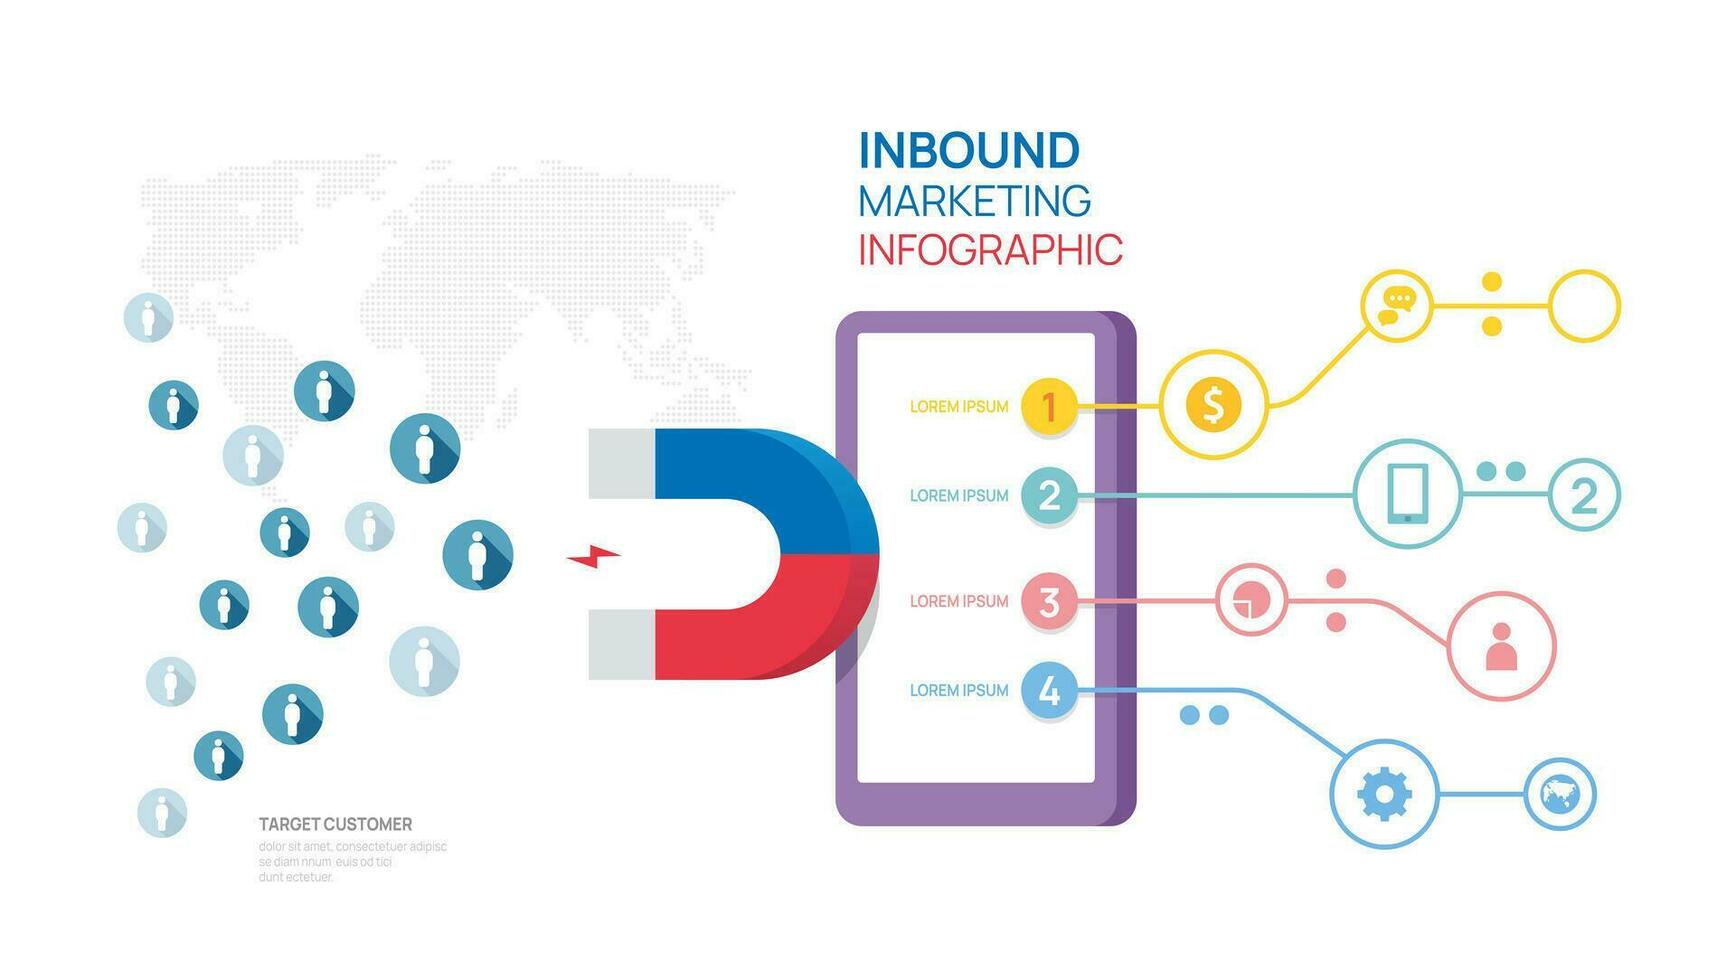 Infographic Inbound Marketing diagram template for business. Magnet Attracting new Leads and Generating Income concept, vector illustration.